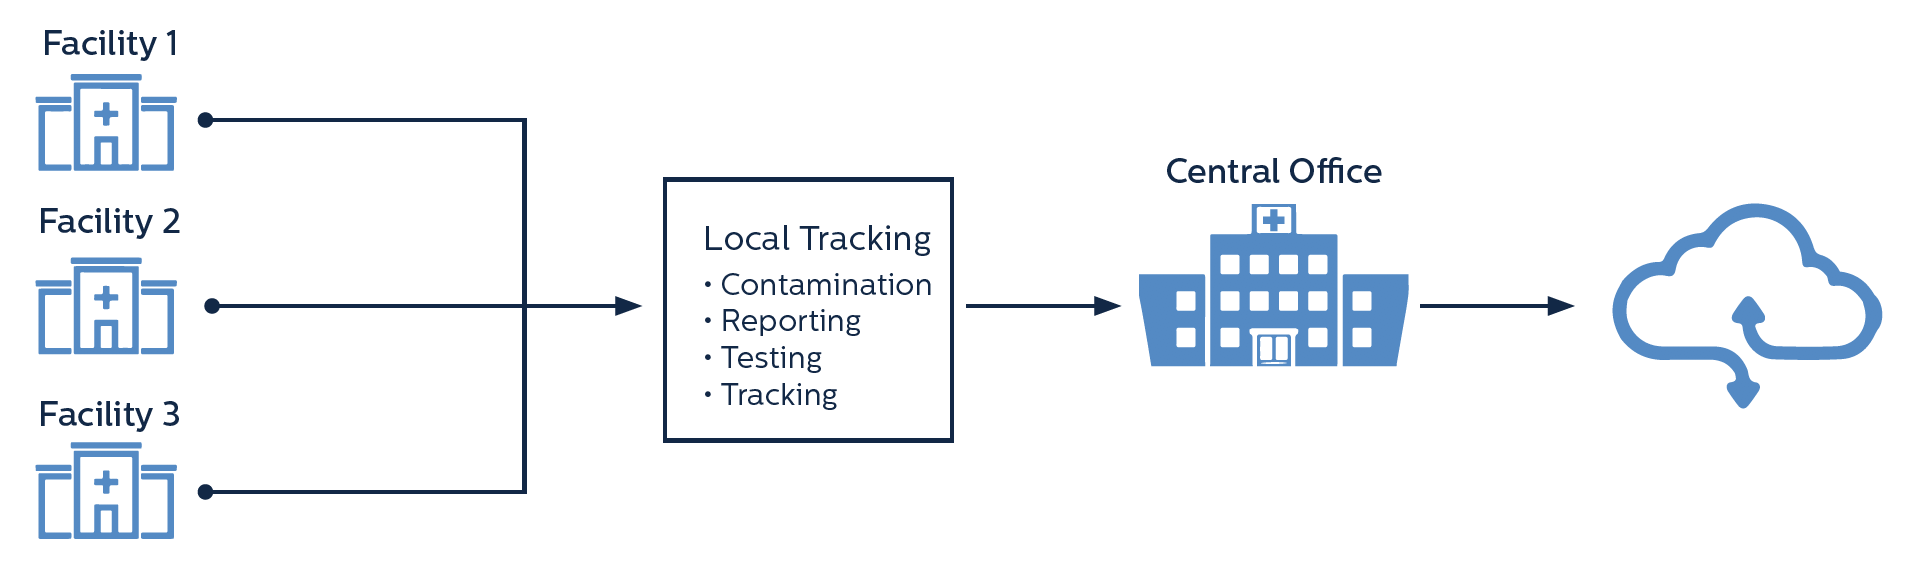 bactrack: connects all facilities